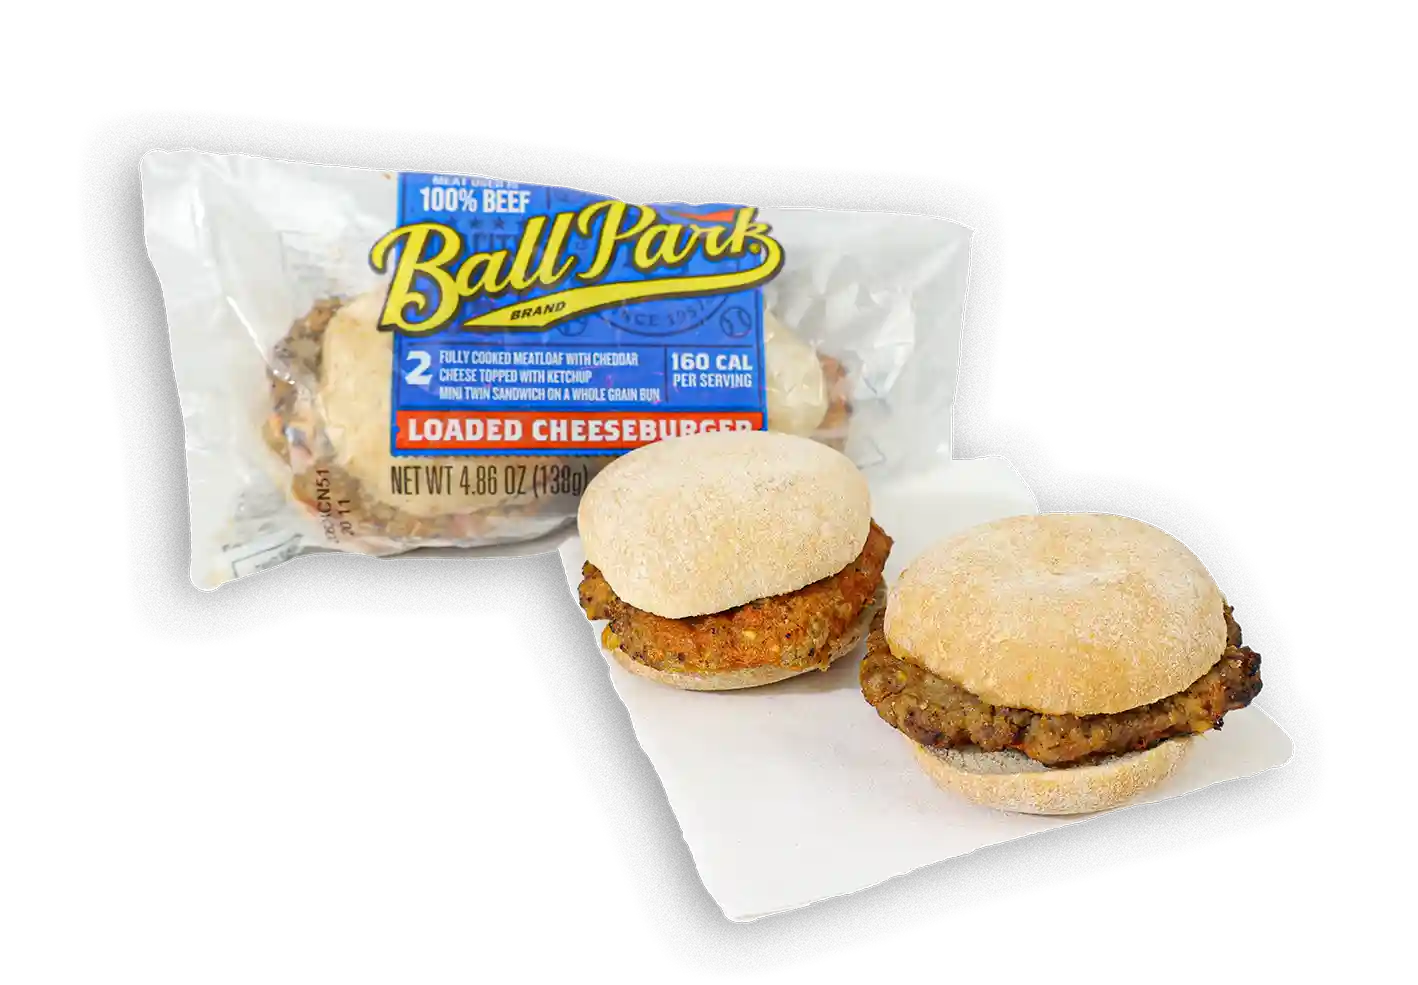 Ball Park® Individually Wrapped Loaded Cheeseburger Mini Twin Sandwiches, 80/4.86 oz._image_01